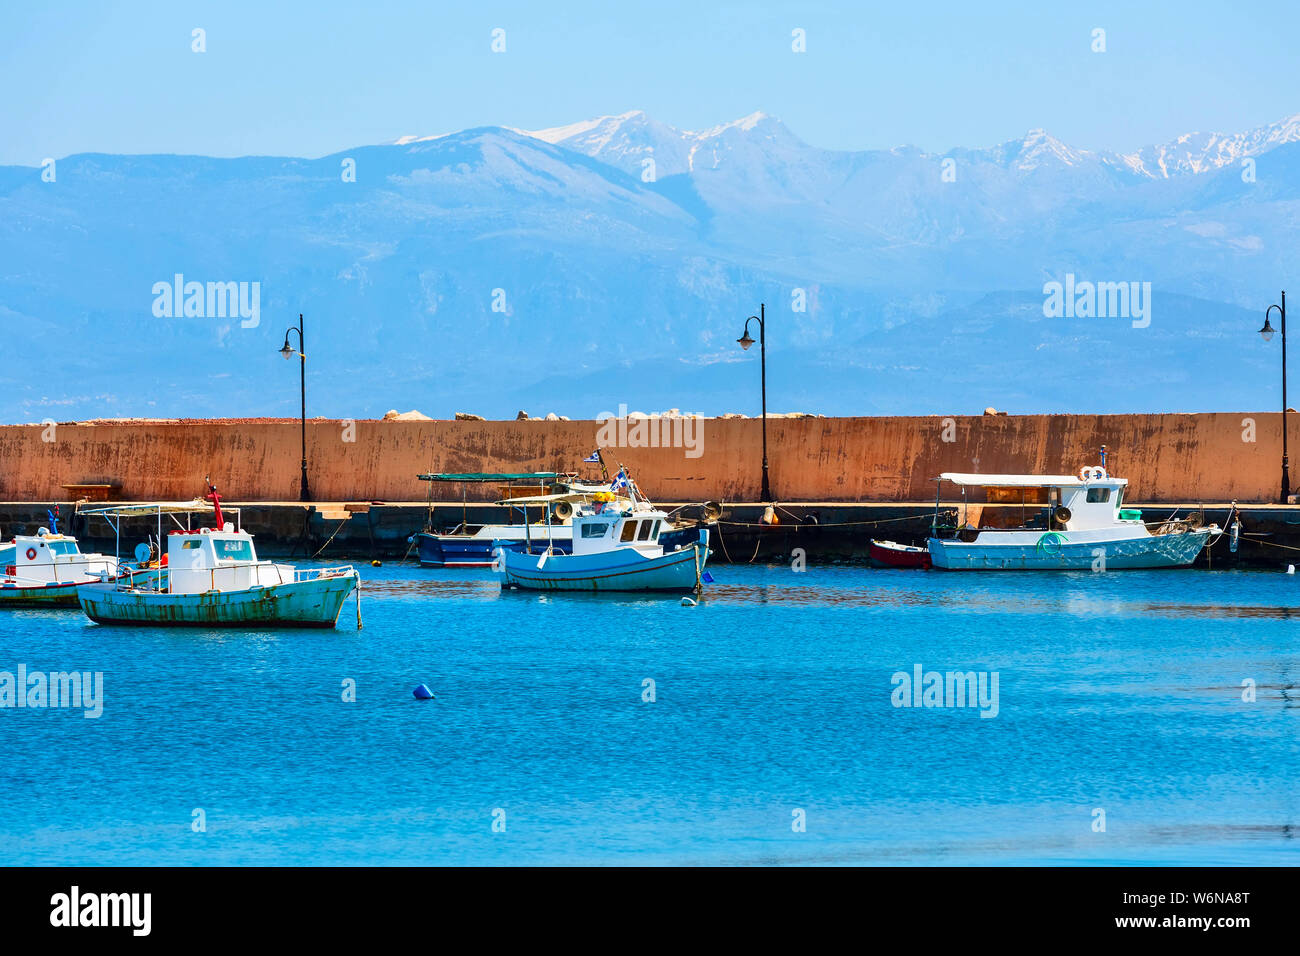 Fishing boats and mountain view in Messinia, Peloponnese, Greece Stock Photo